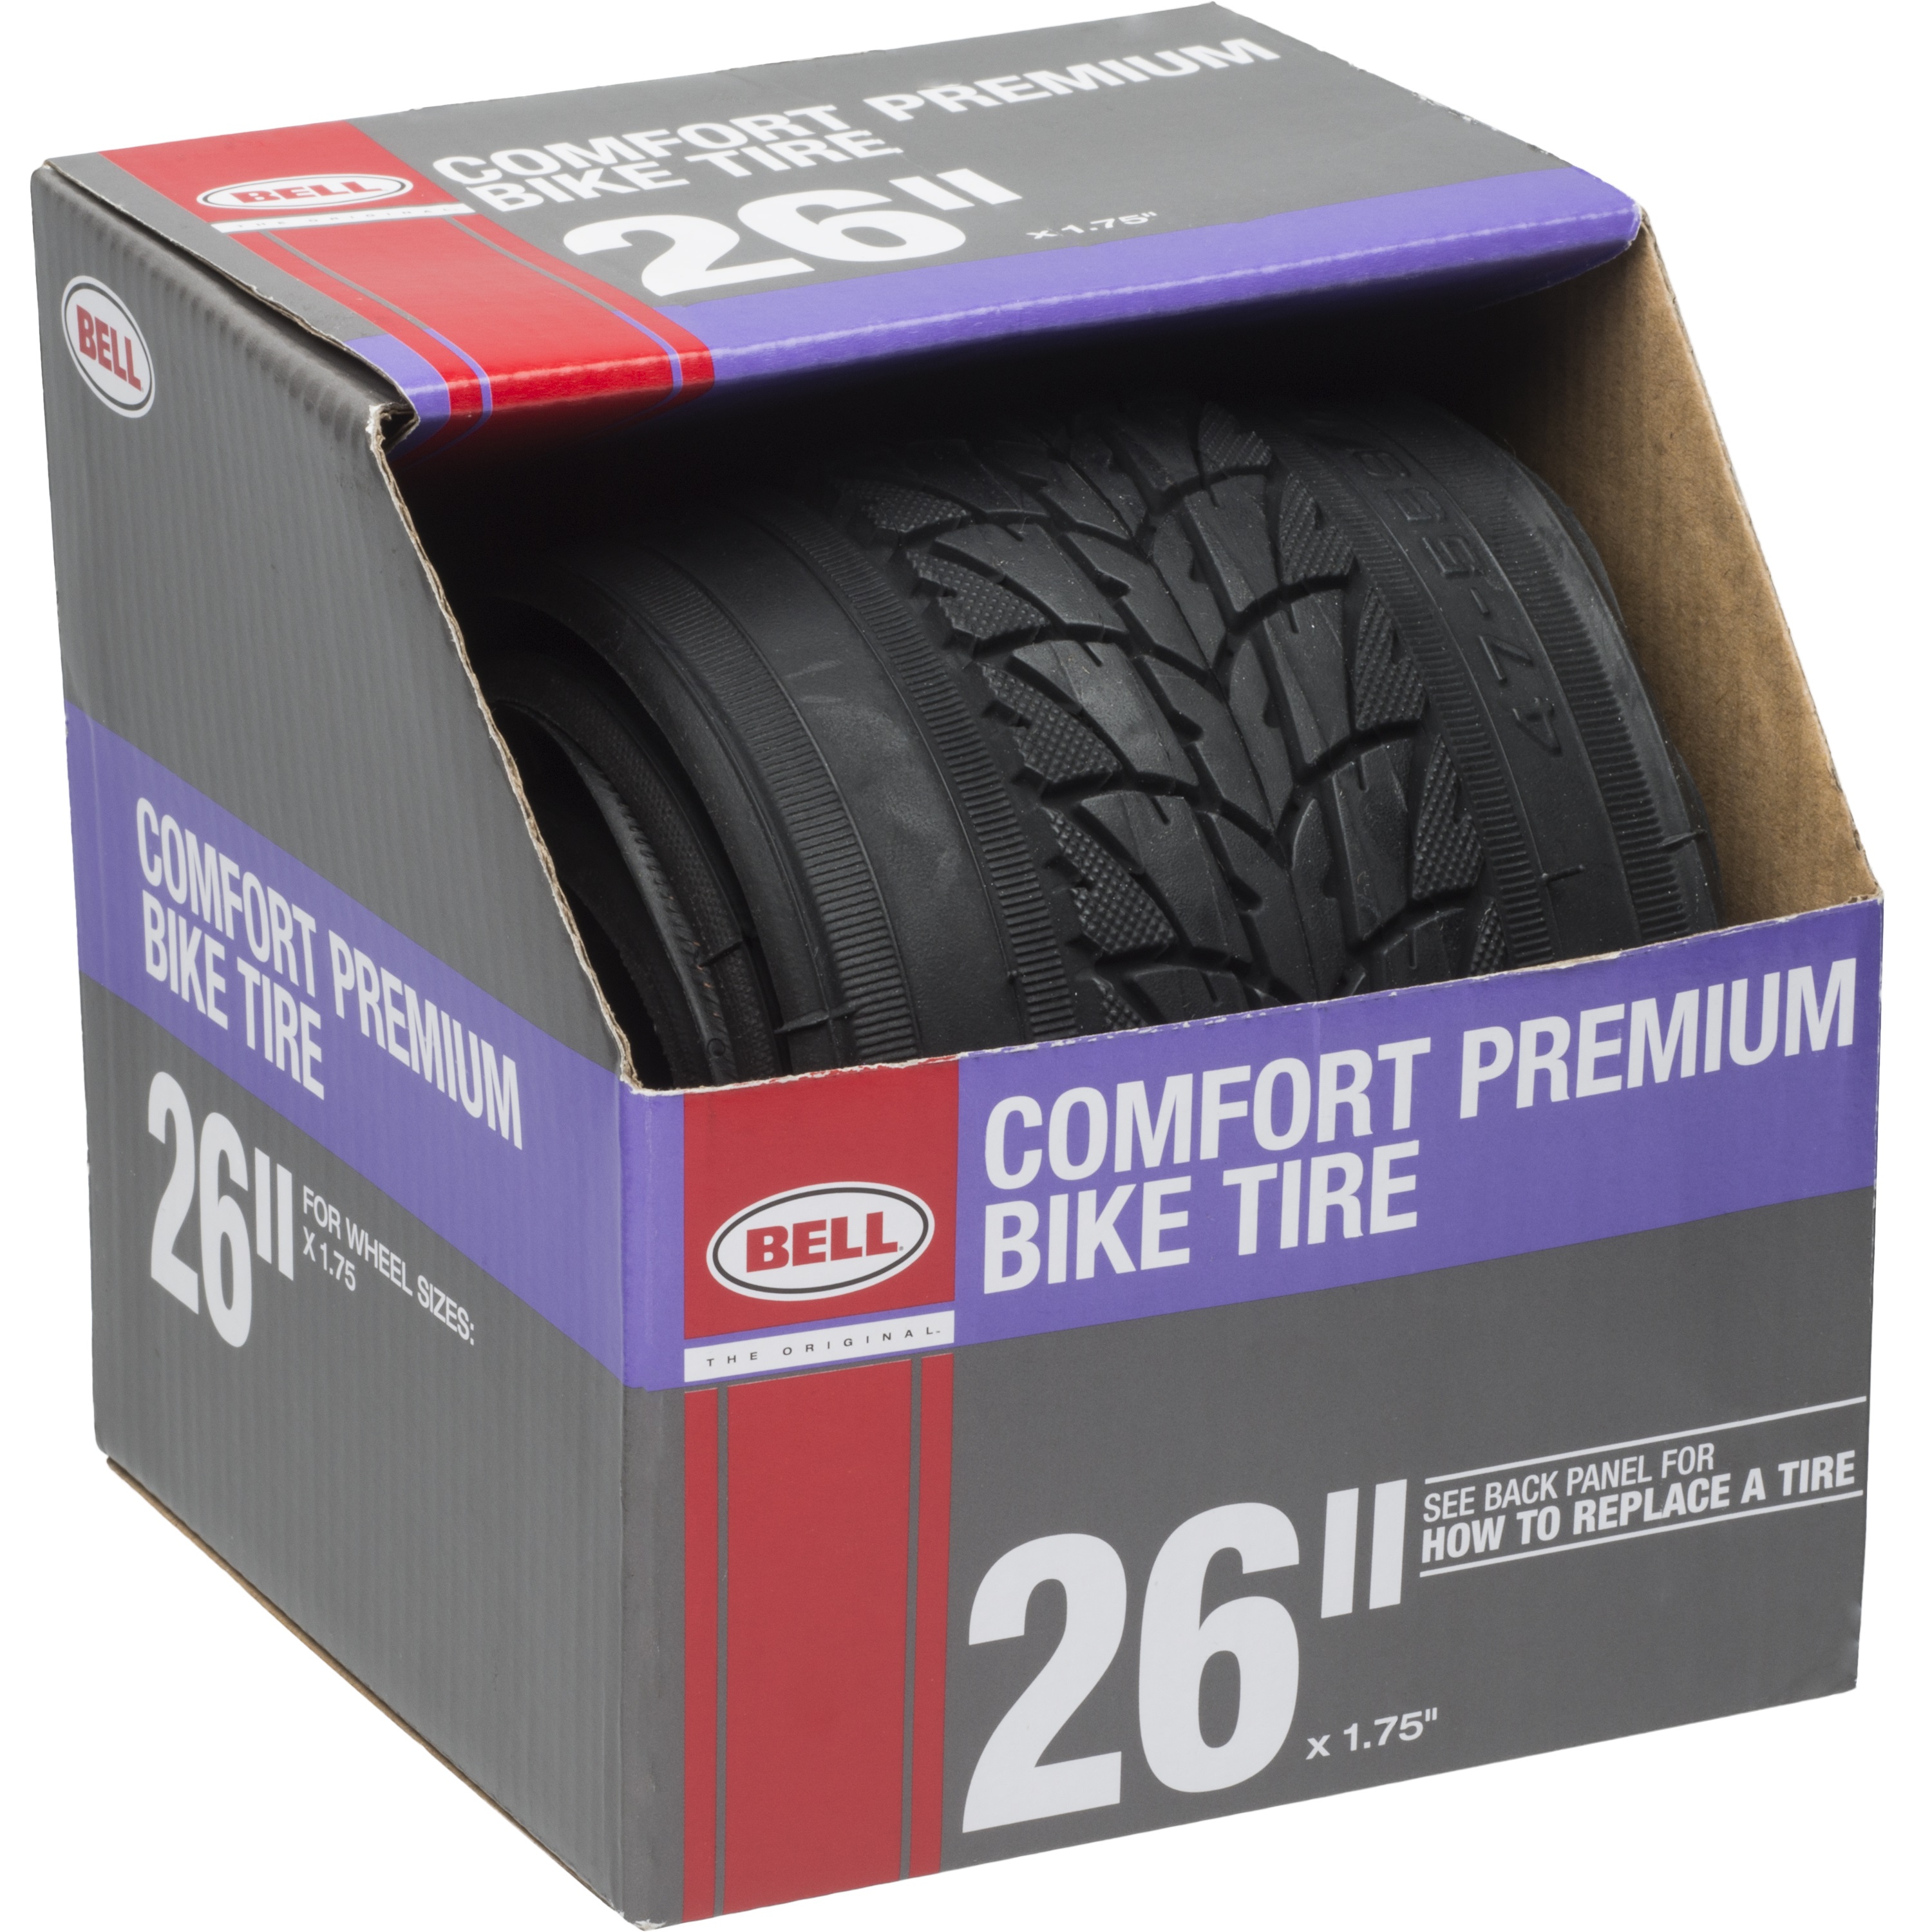 Bell Sports Comfort Roundabout Premium Commuter Tire, 26" x 1.75", Black - image 1 of 2